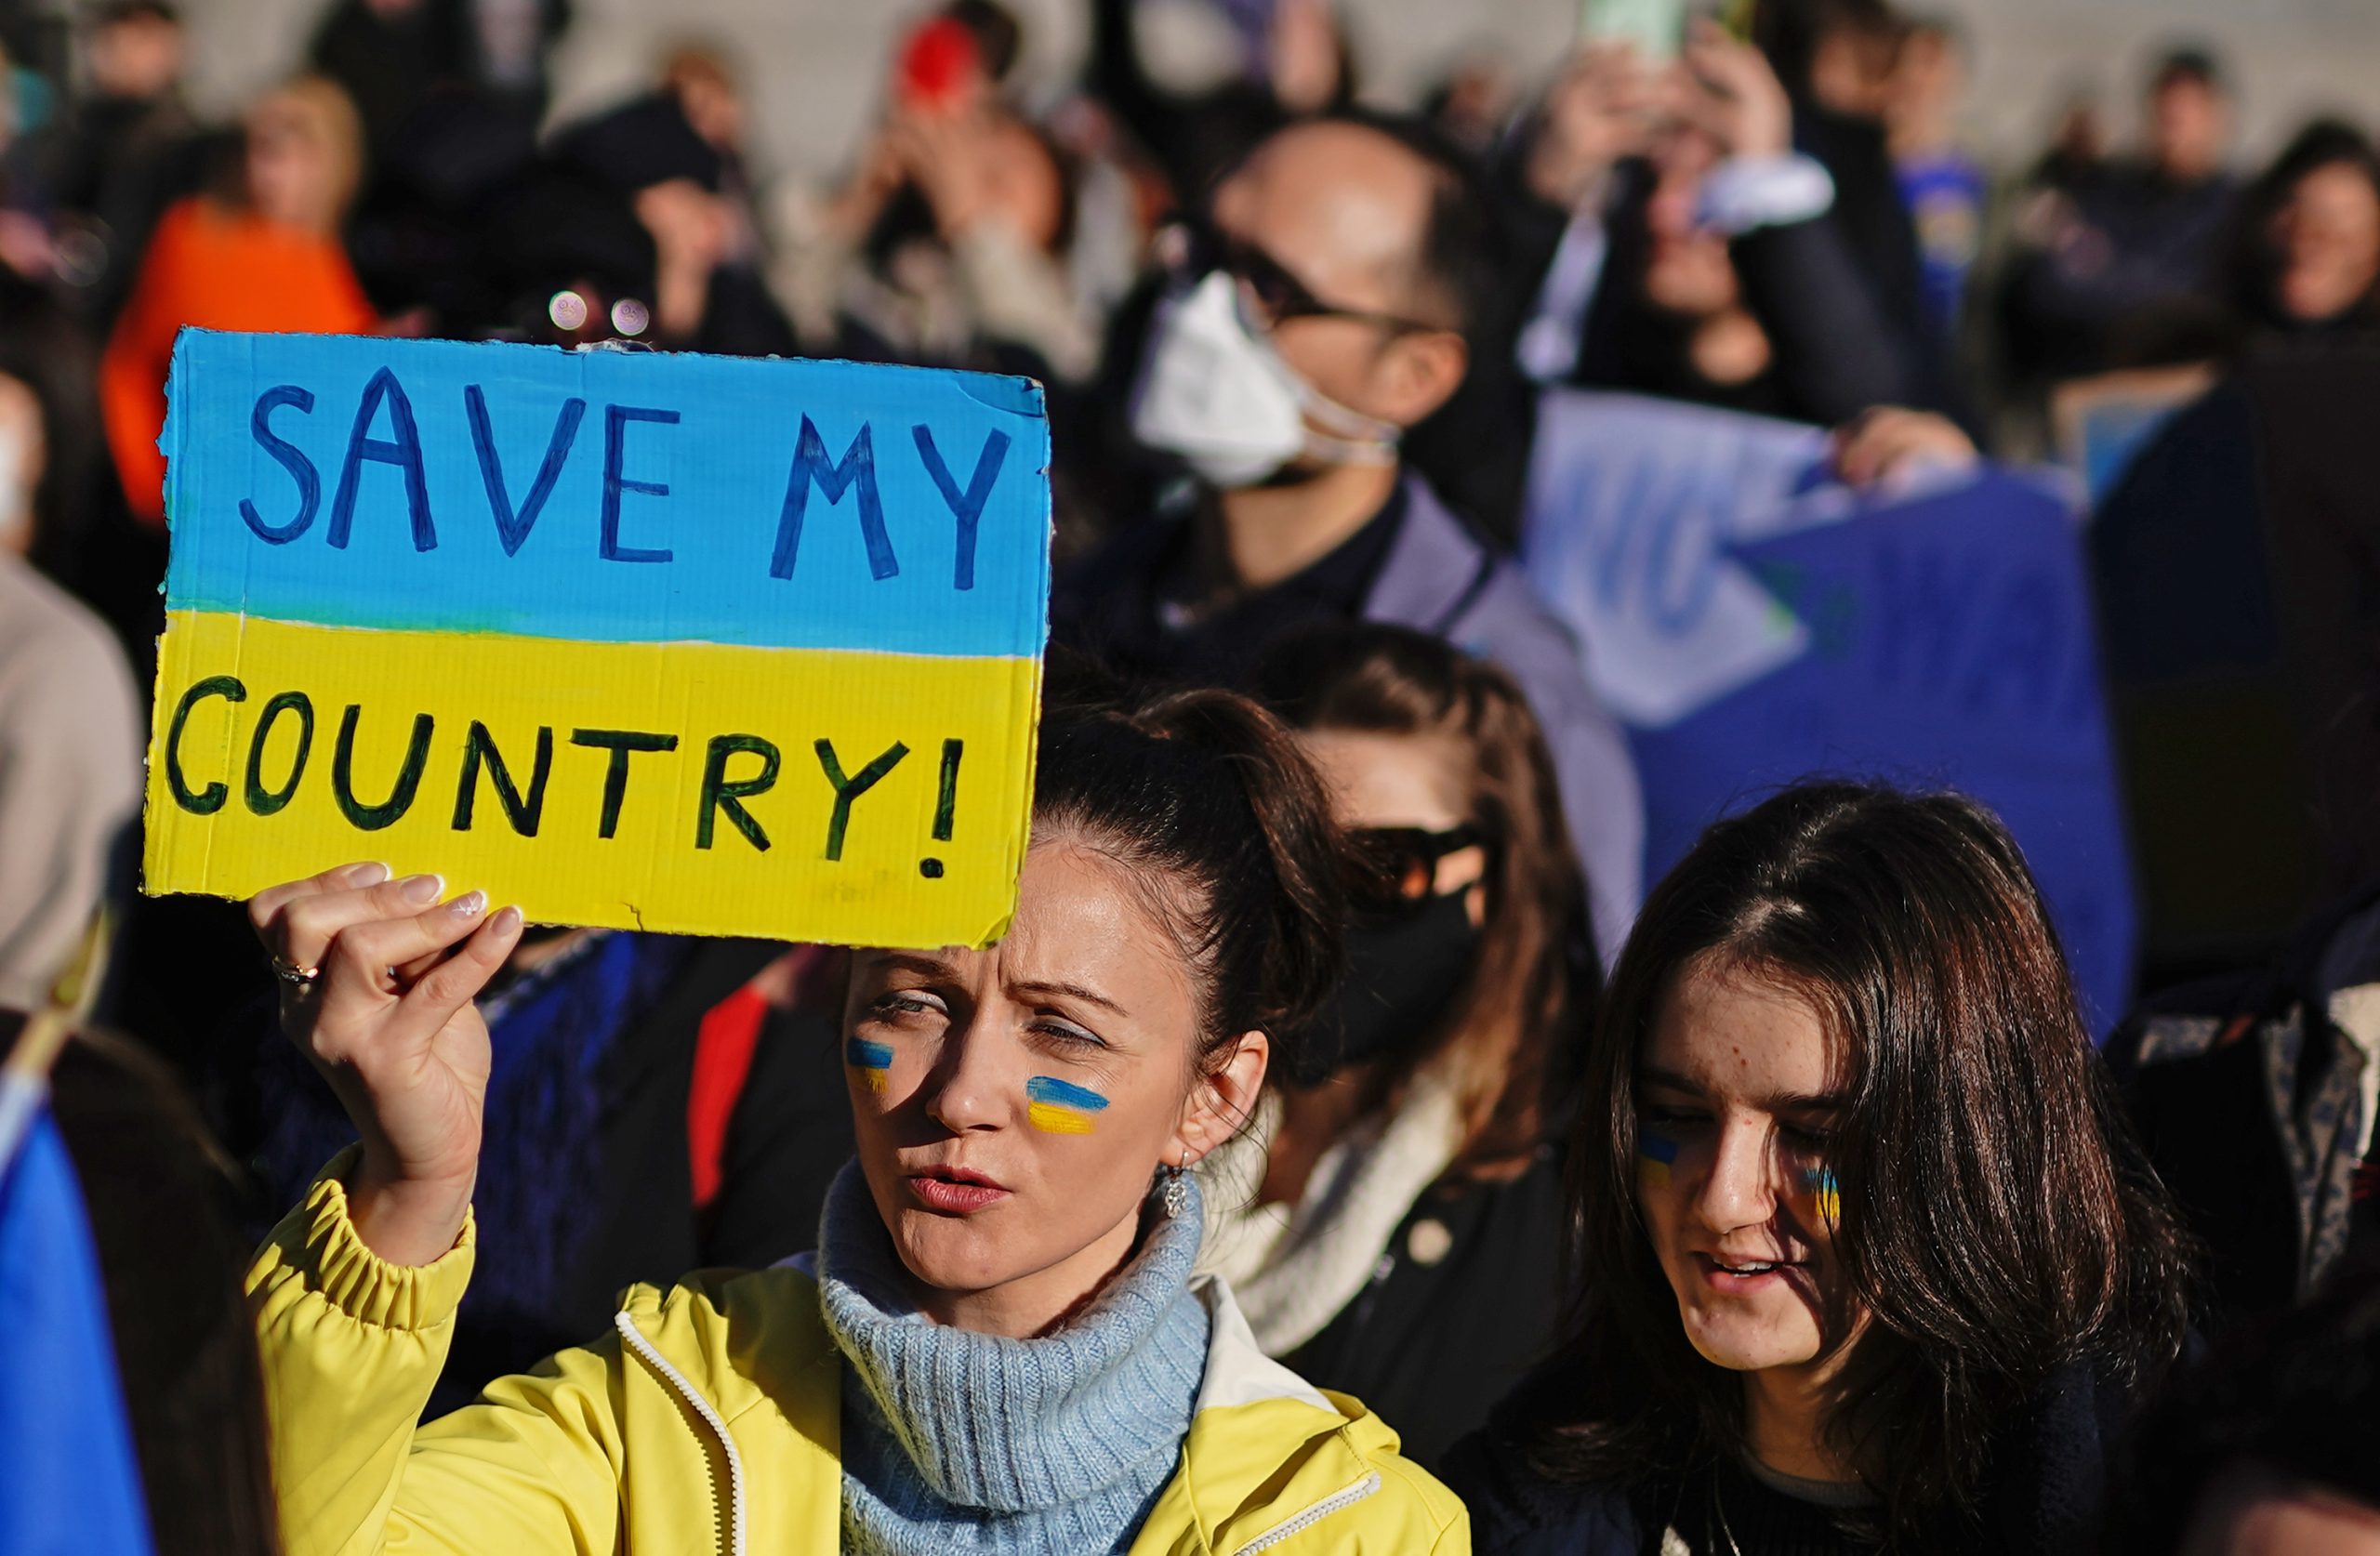 A protest in London against the invasion of Ukraine, February 2022. Credit: Aaron Chown/PA